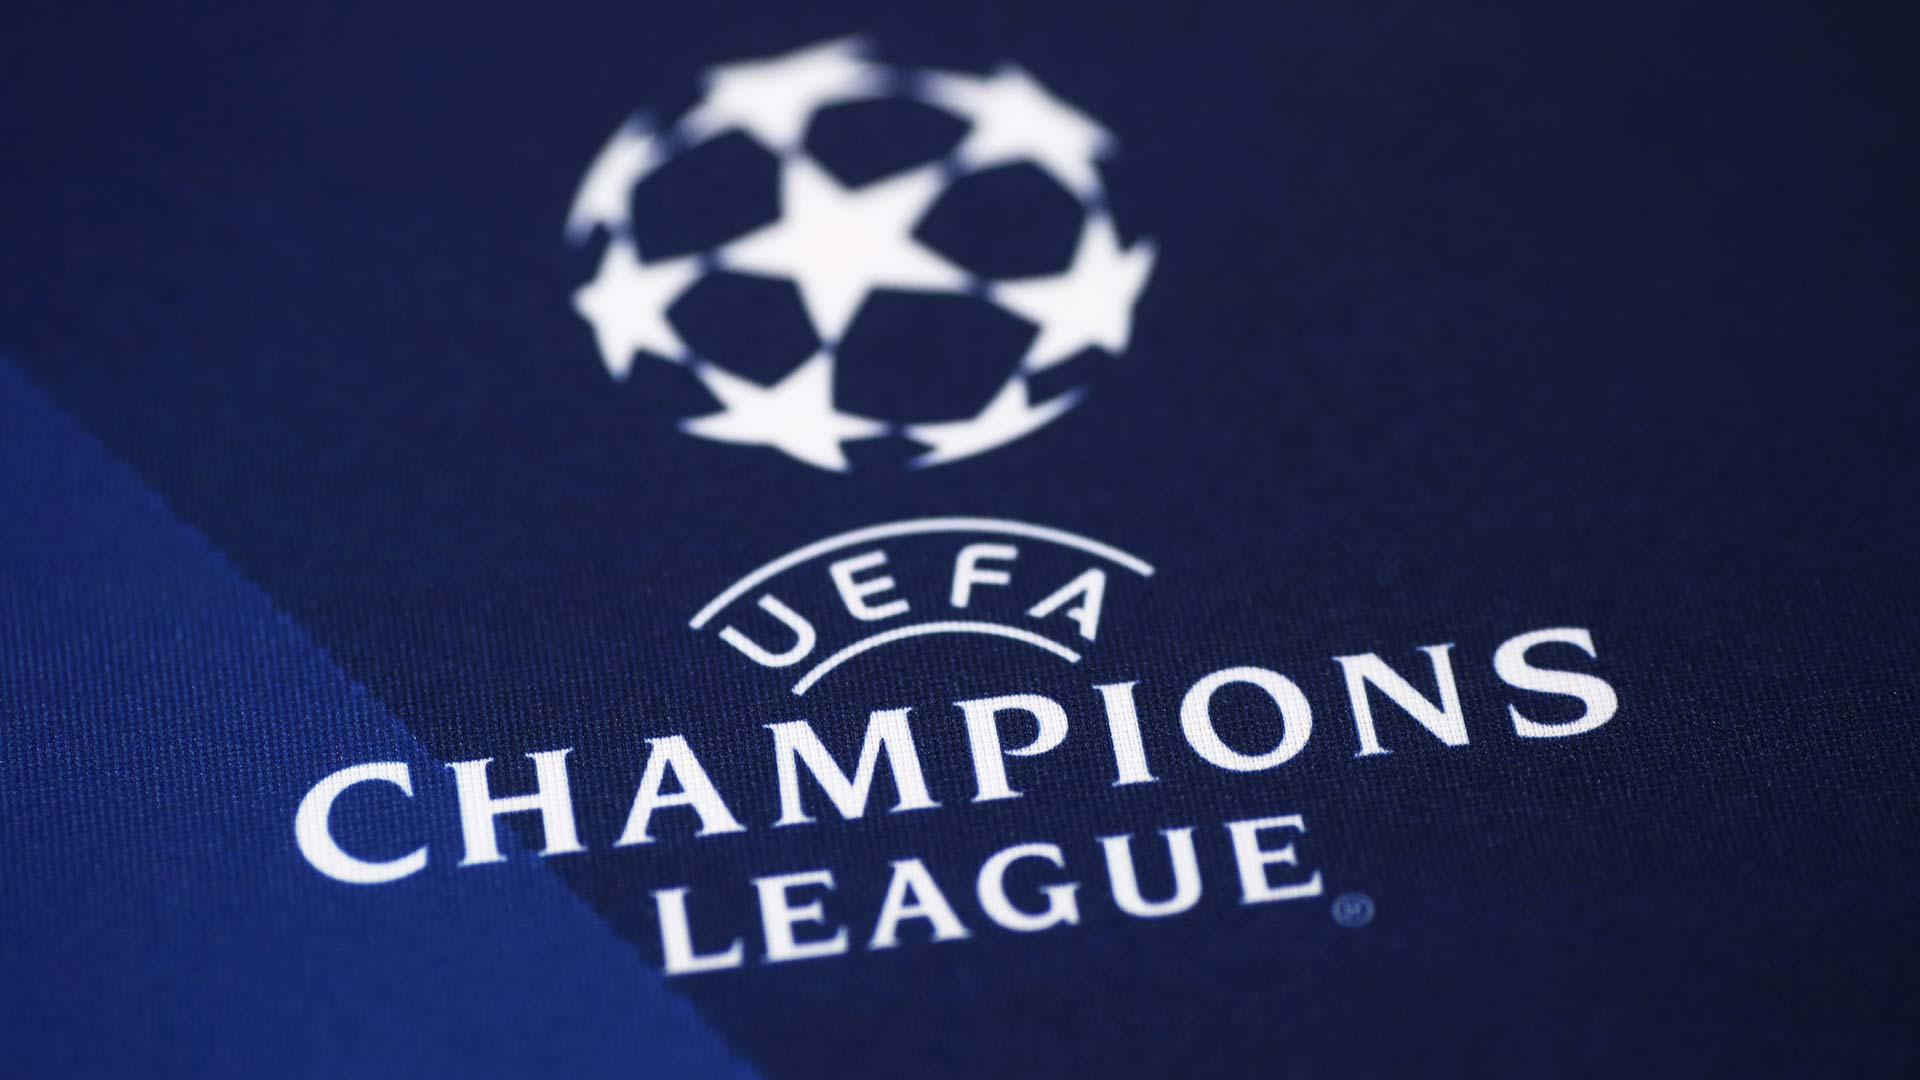 How to watch Champions League 21/22 — the UEFA Champions League logo